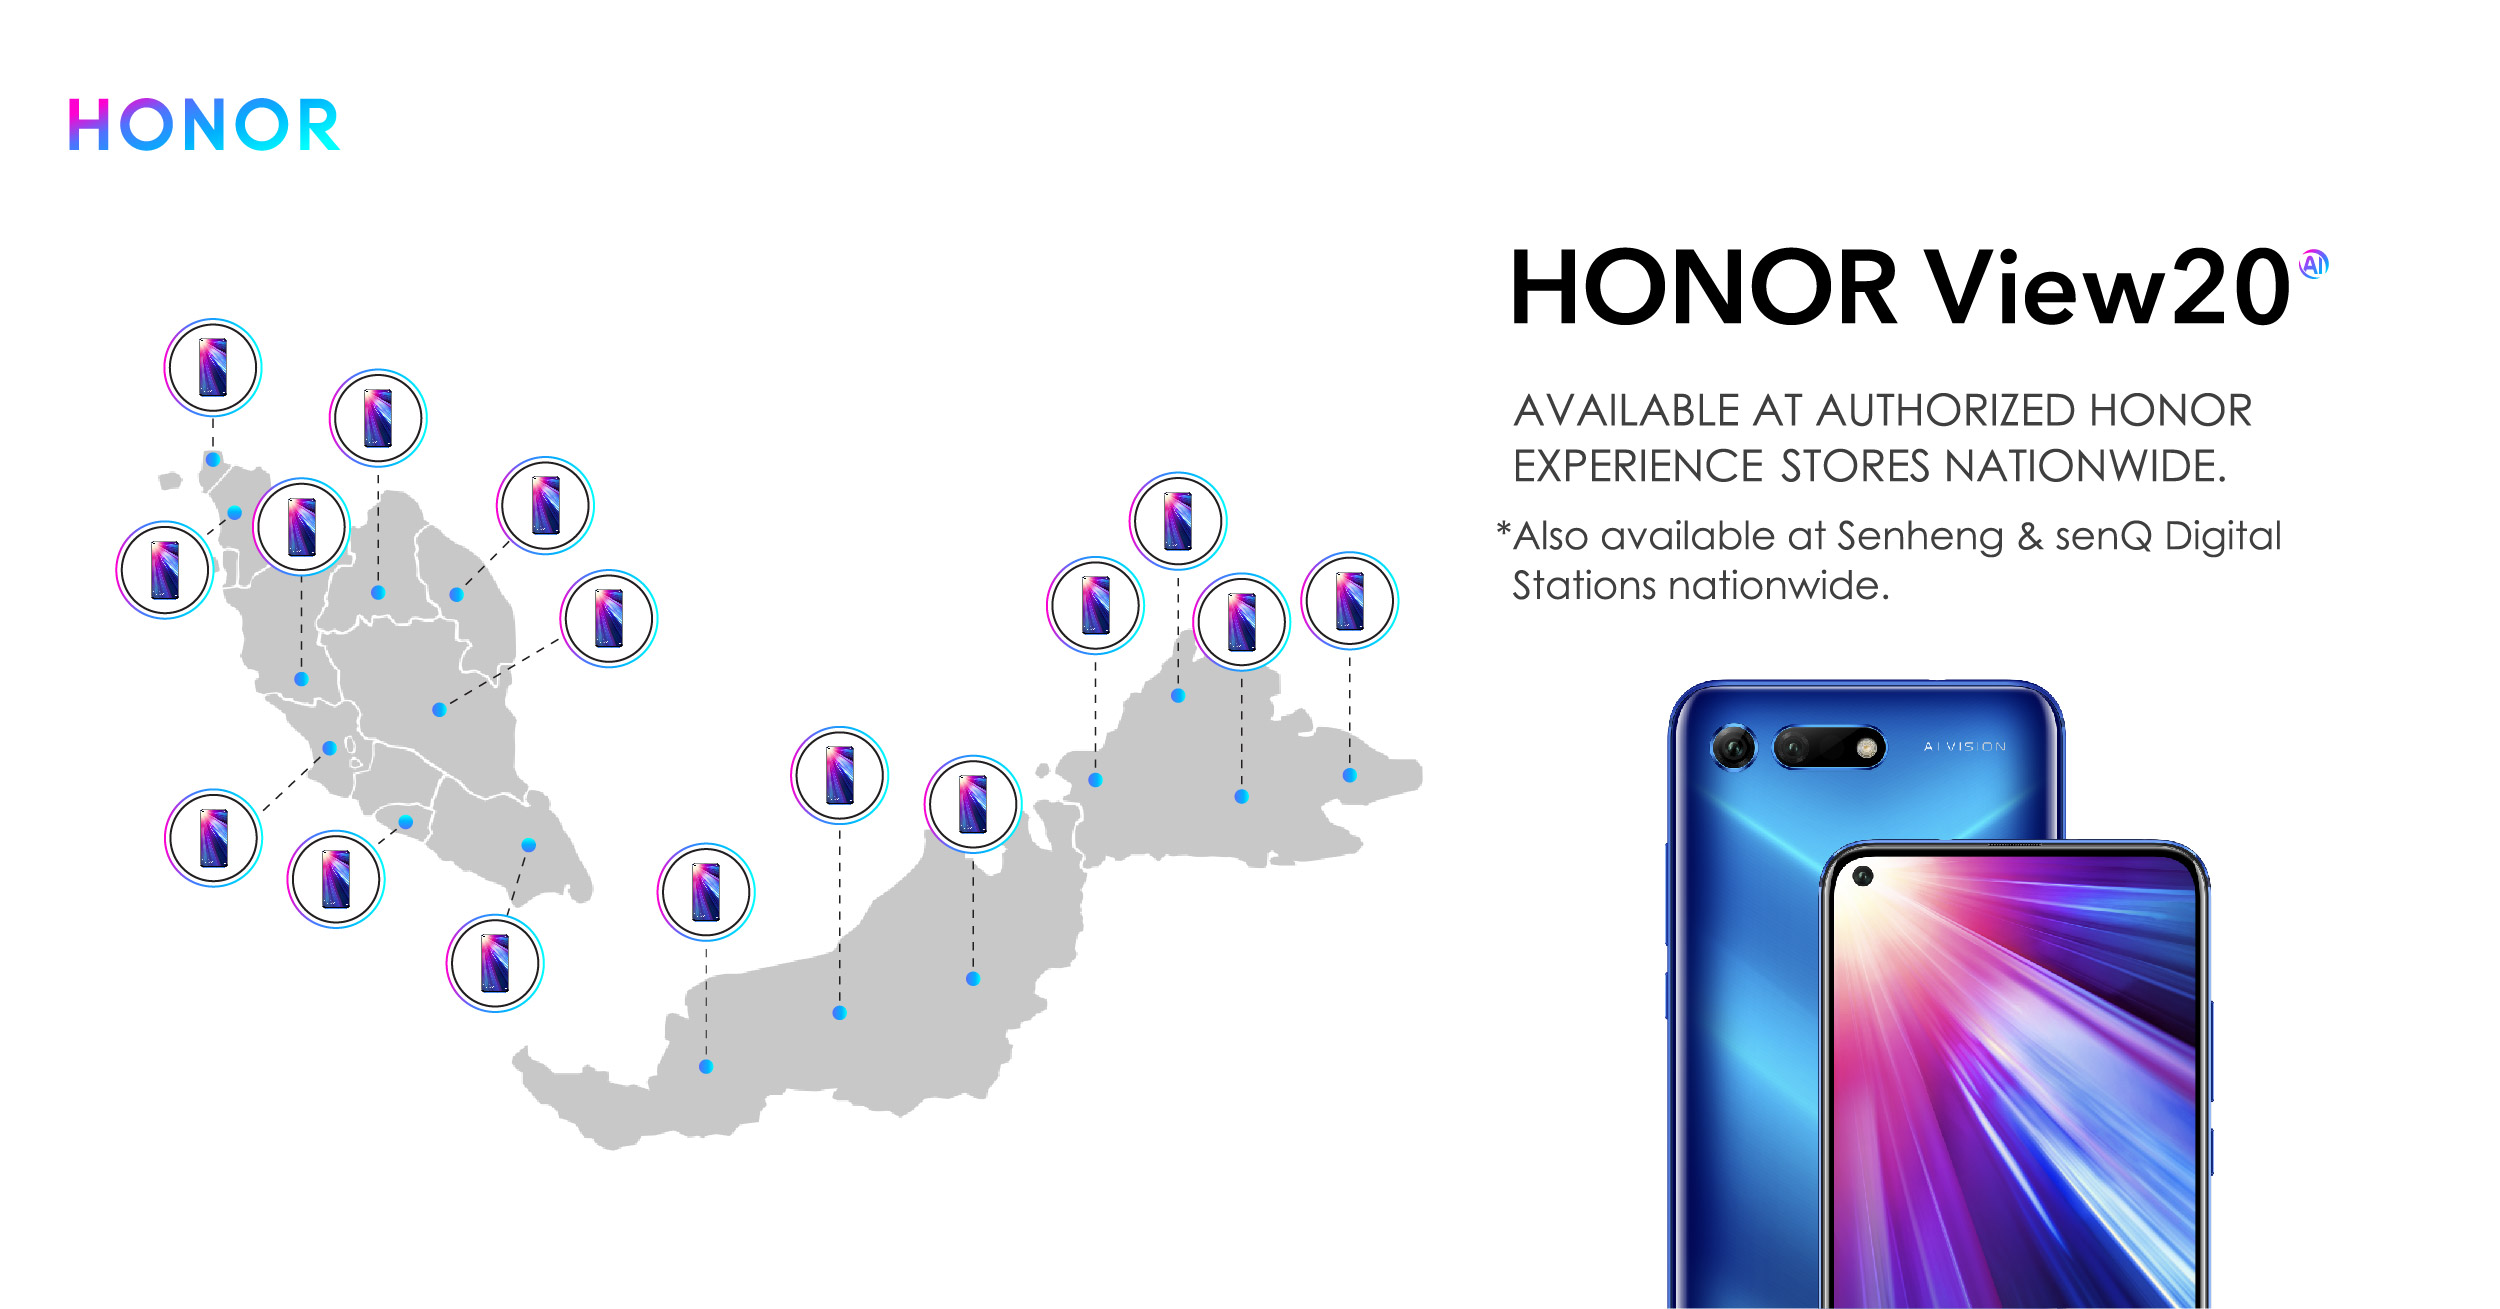 HONOR View20 Nationwide